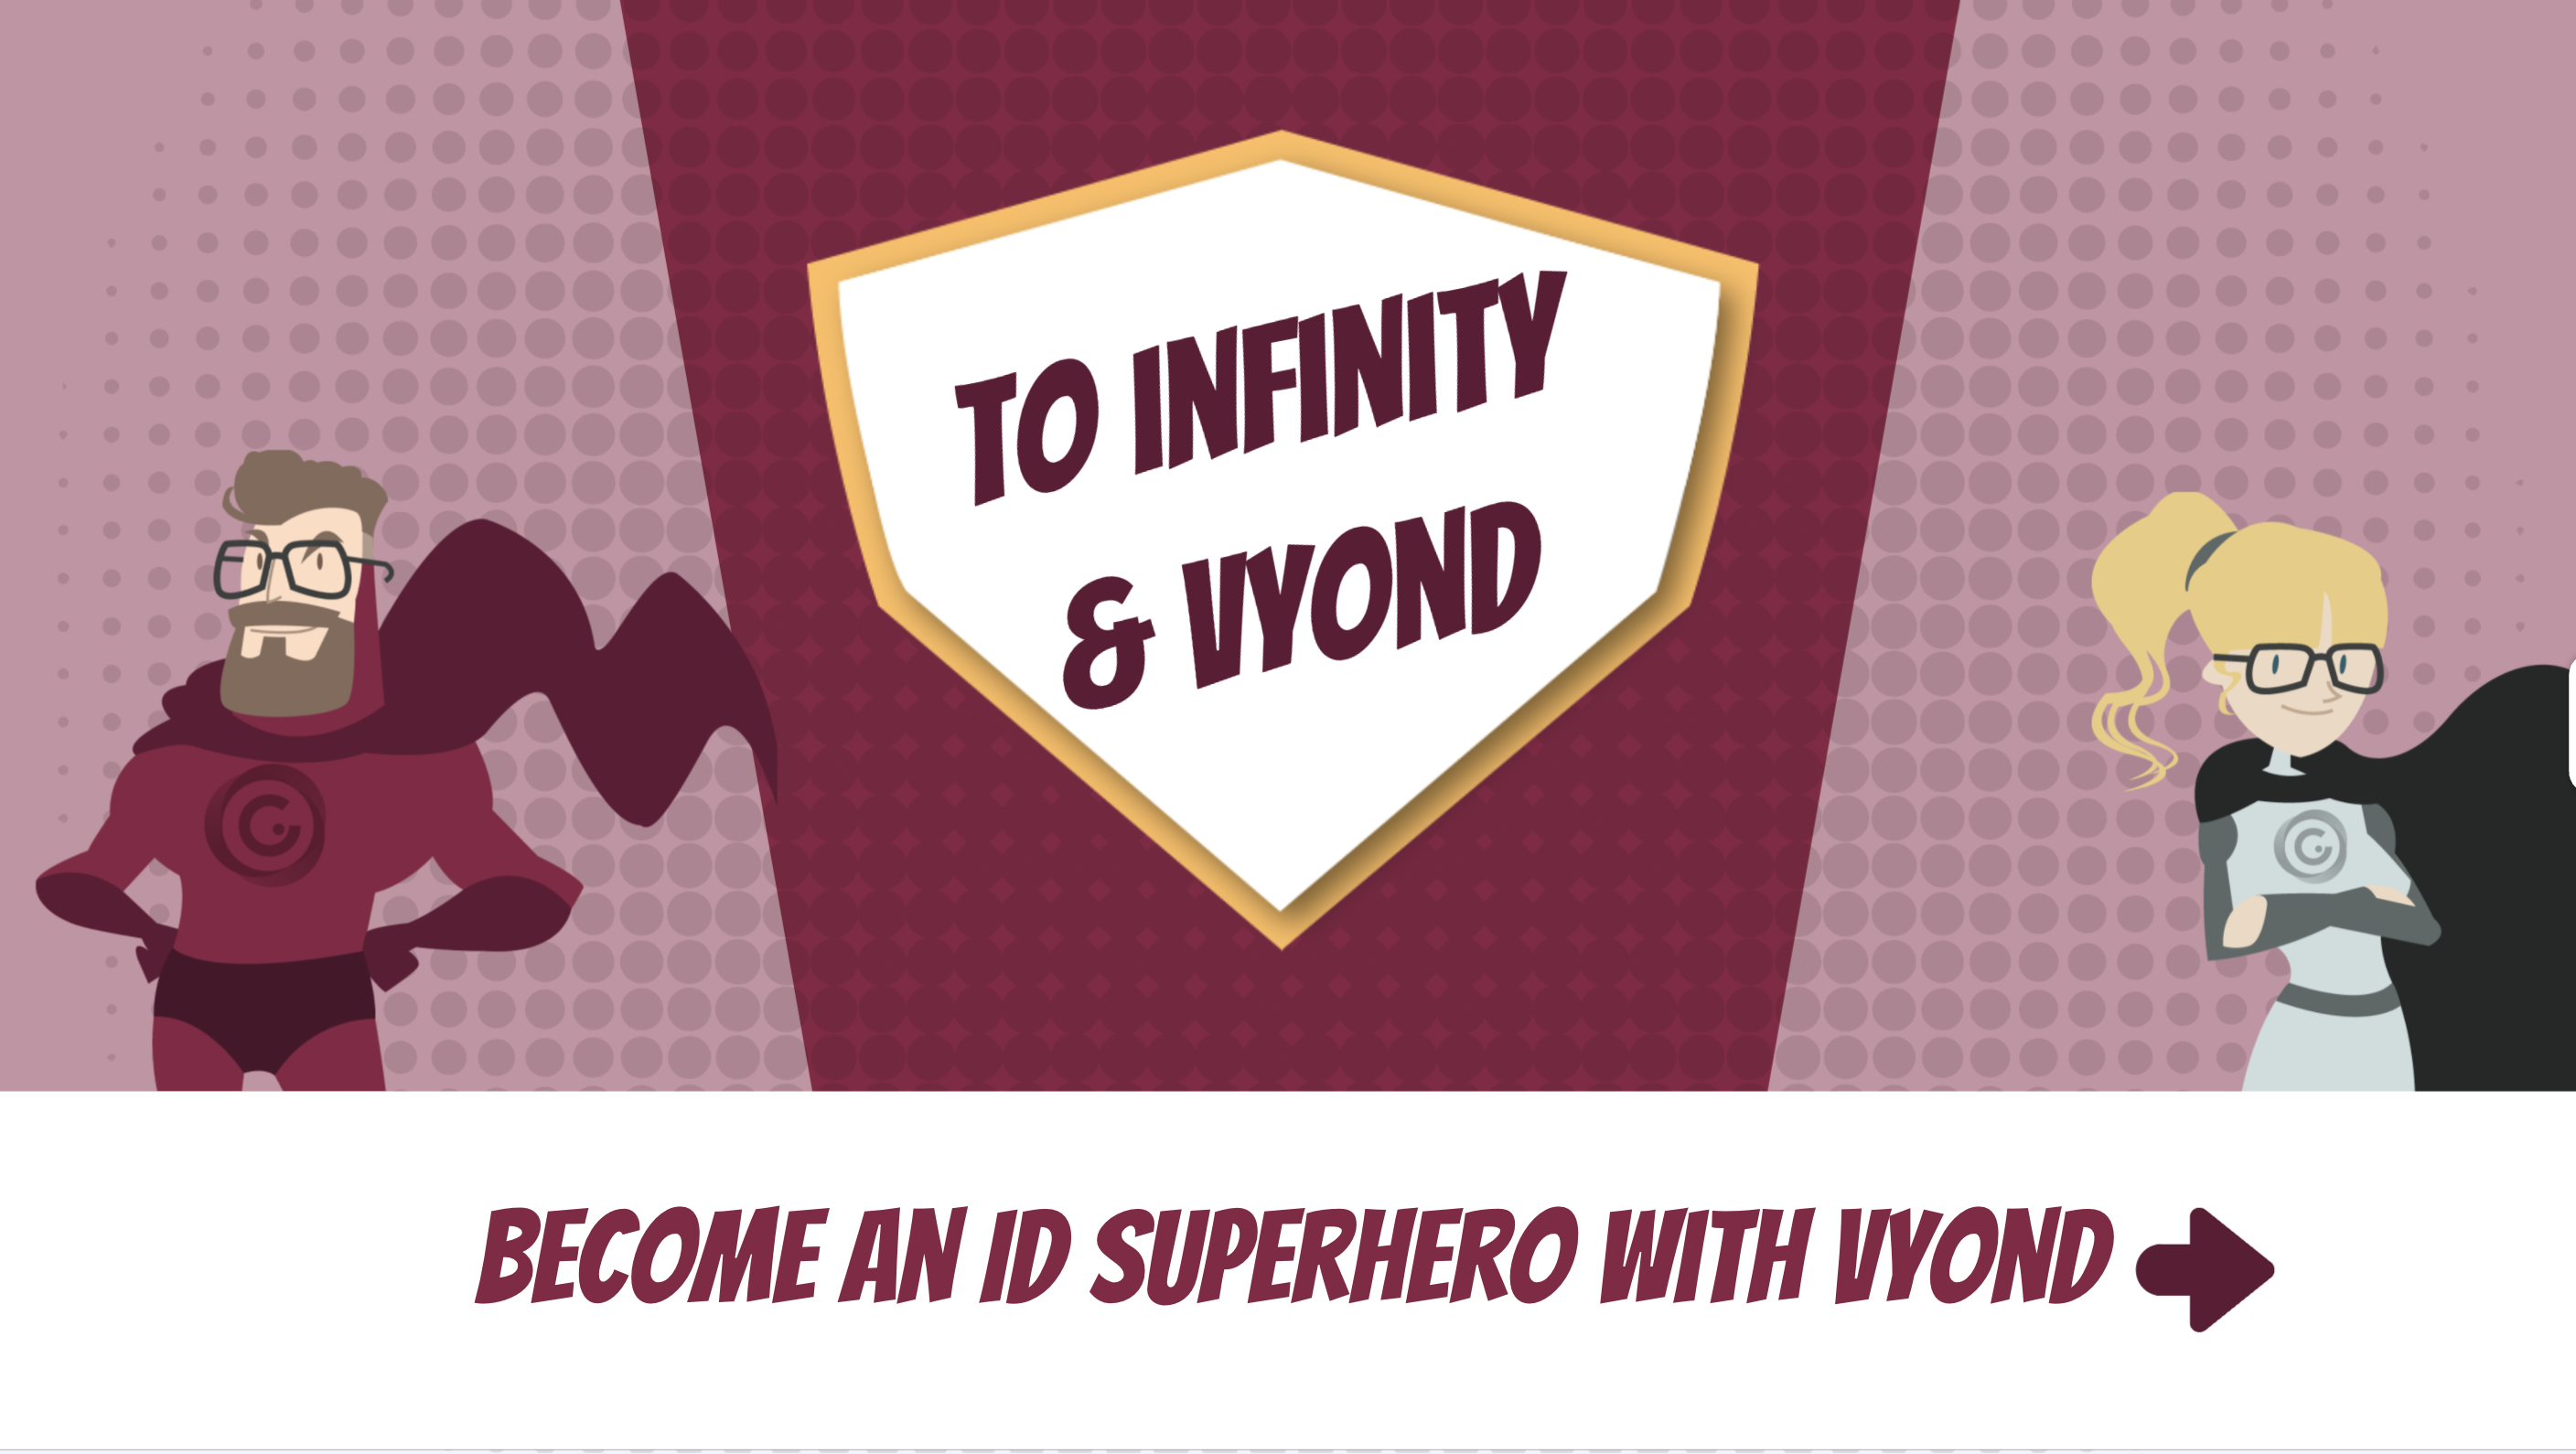 To Infinity and Vyond: Become an I.D. Superhero with Vyond